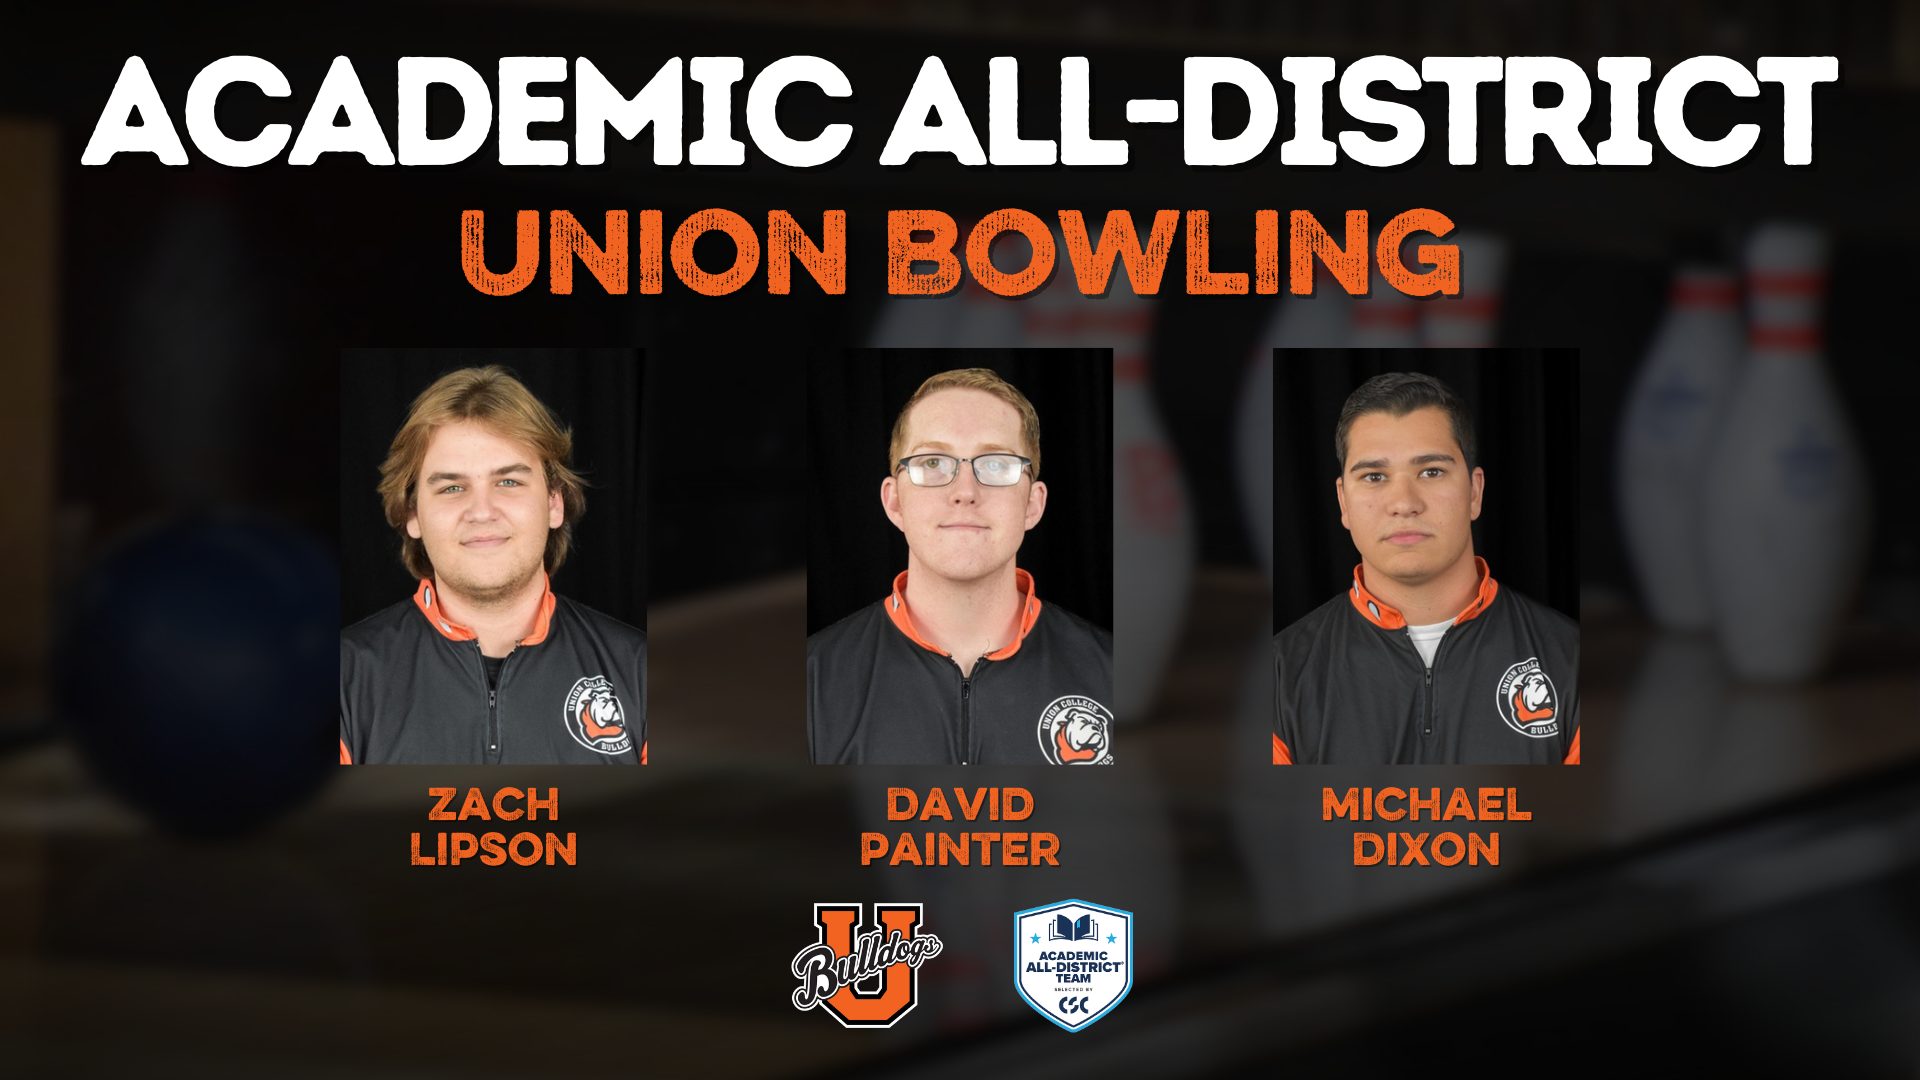 Three Union bowlers named to CSC Academic All-District Team